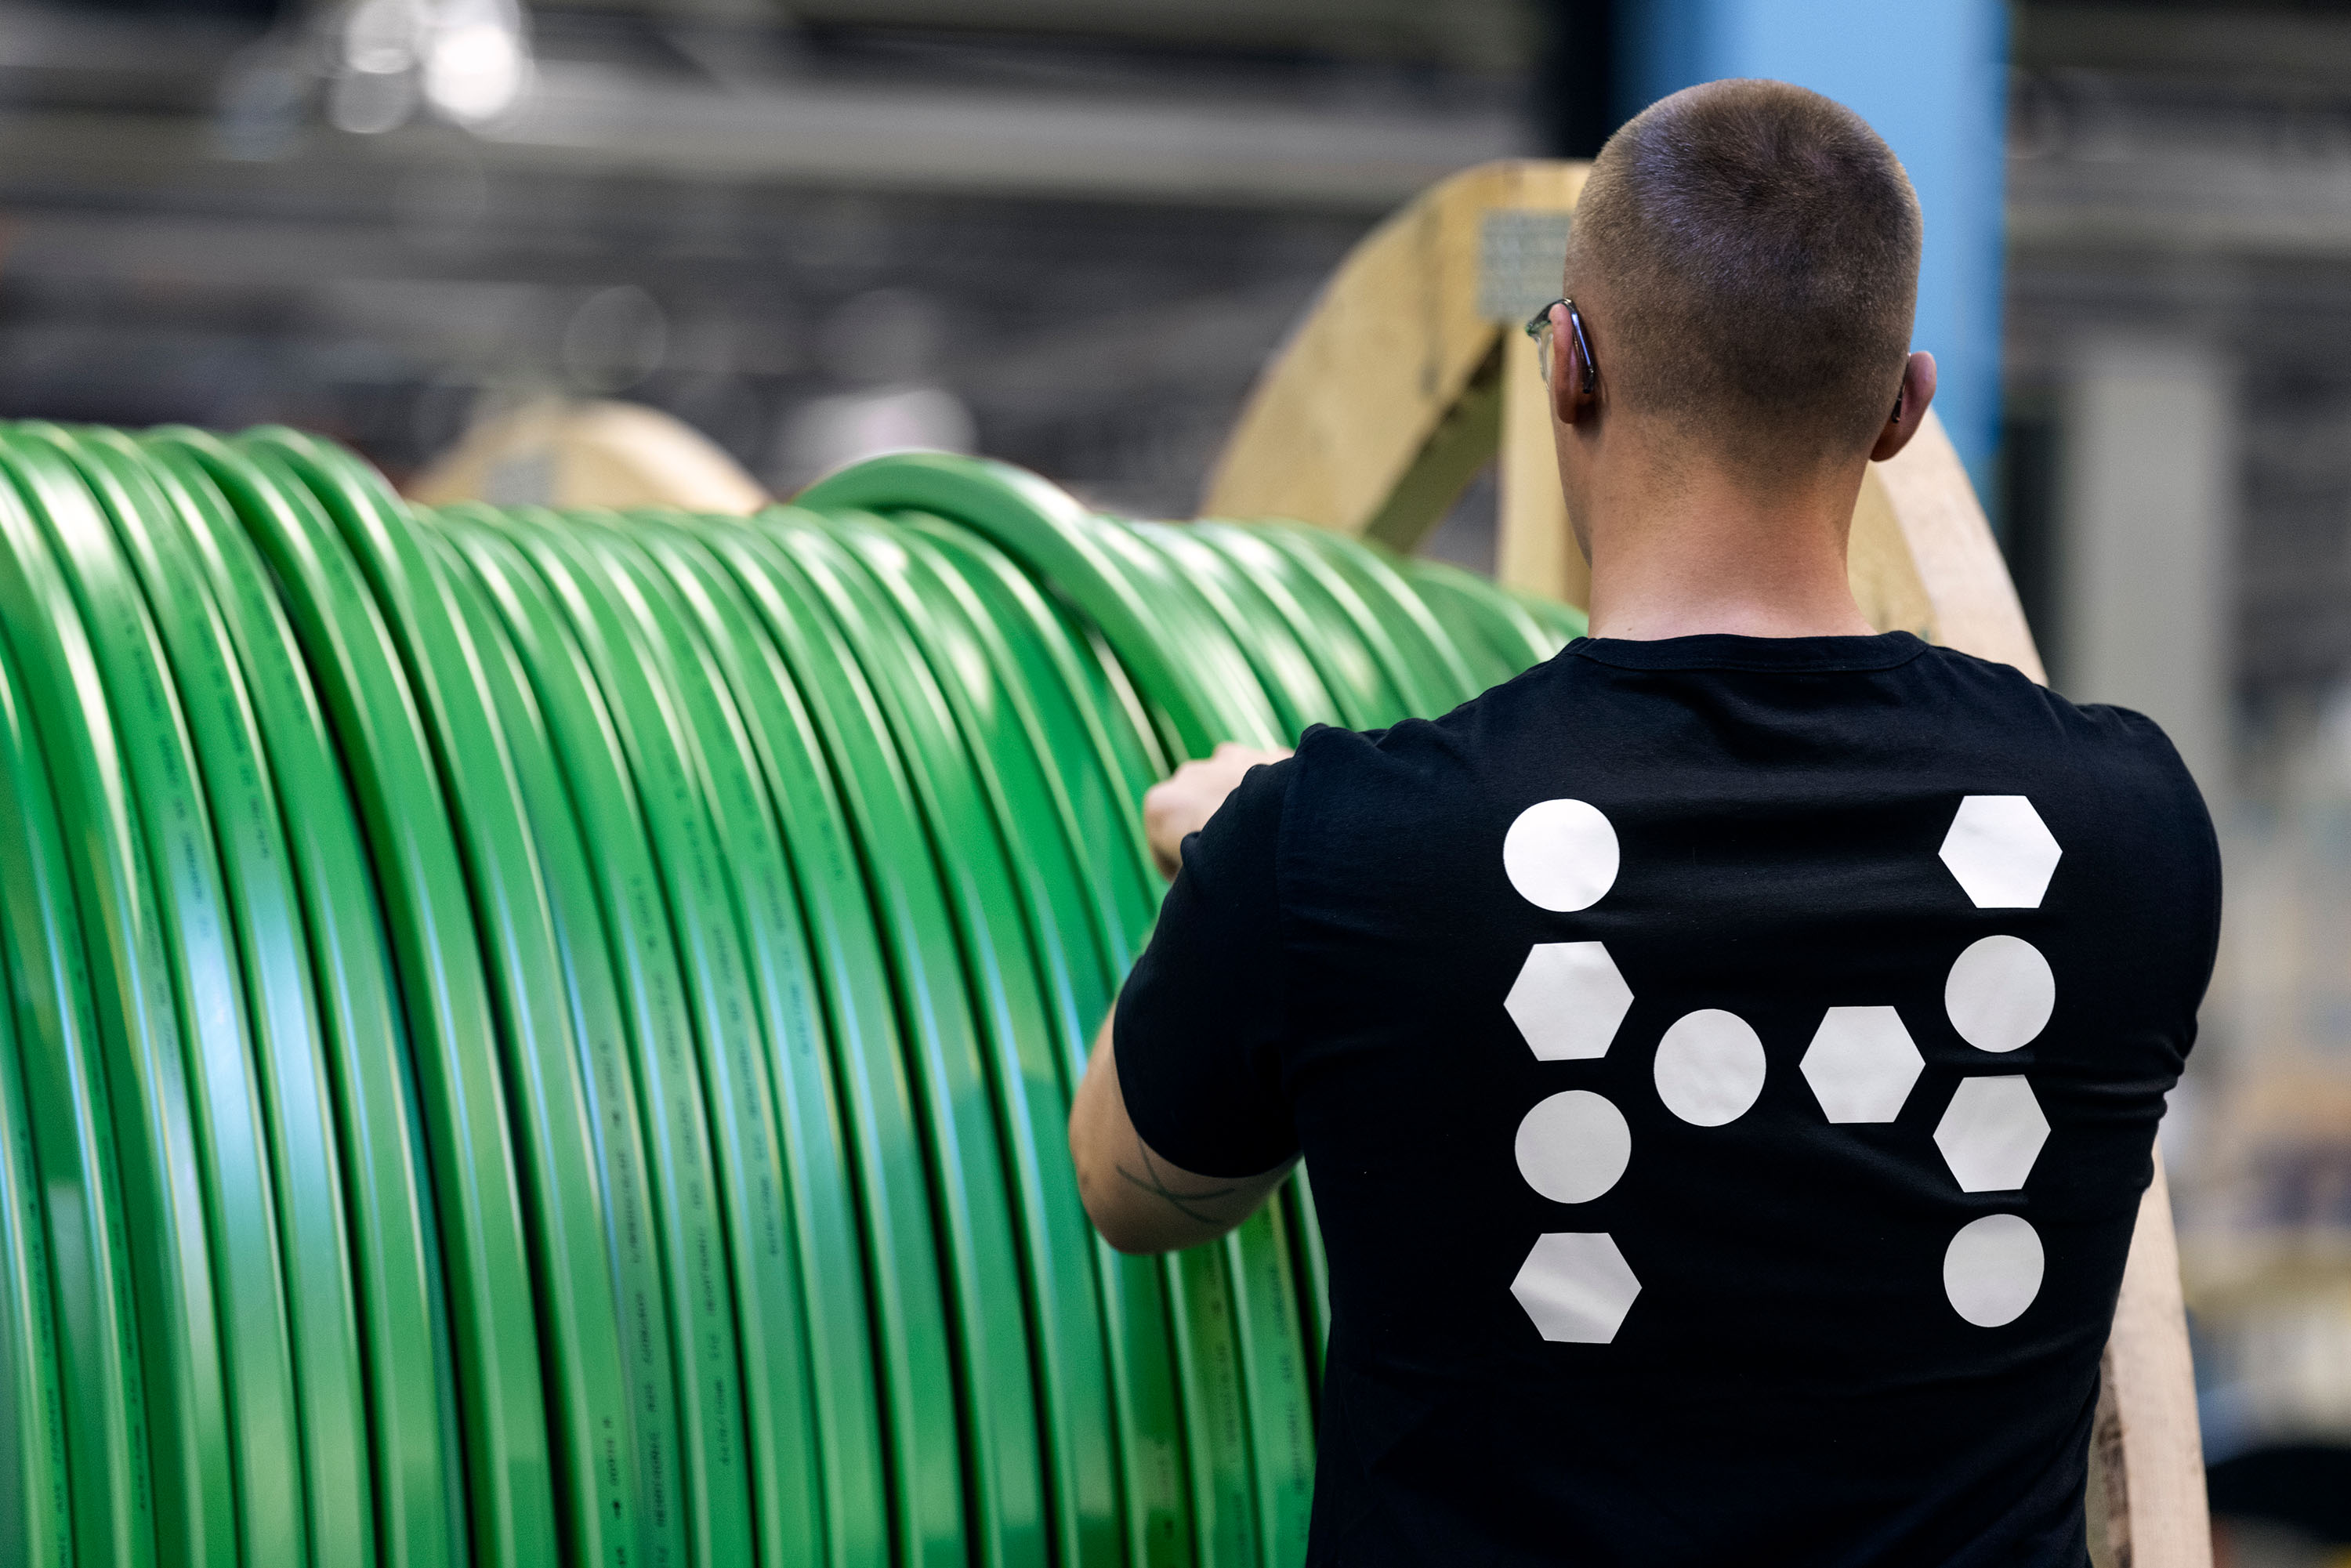 A worker in a factory handling a large spool of bright green micro duct.